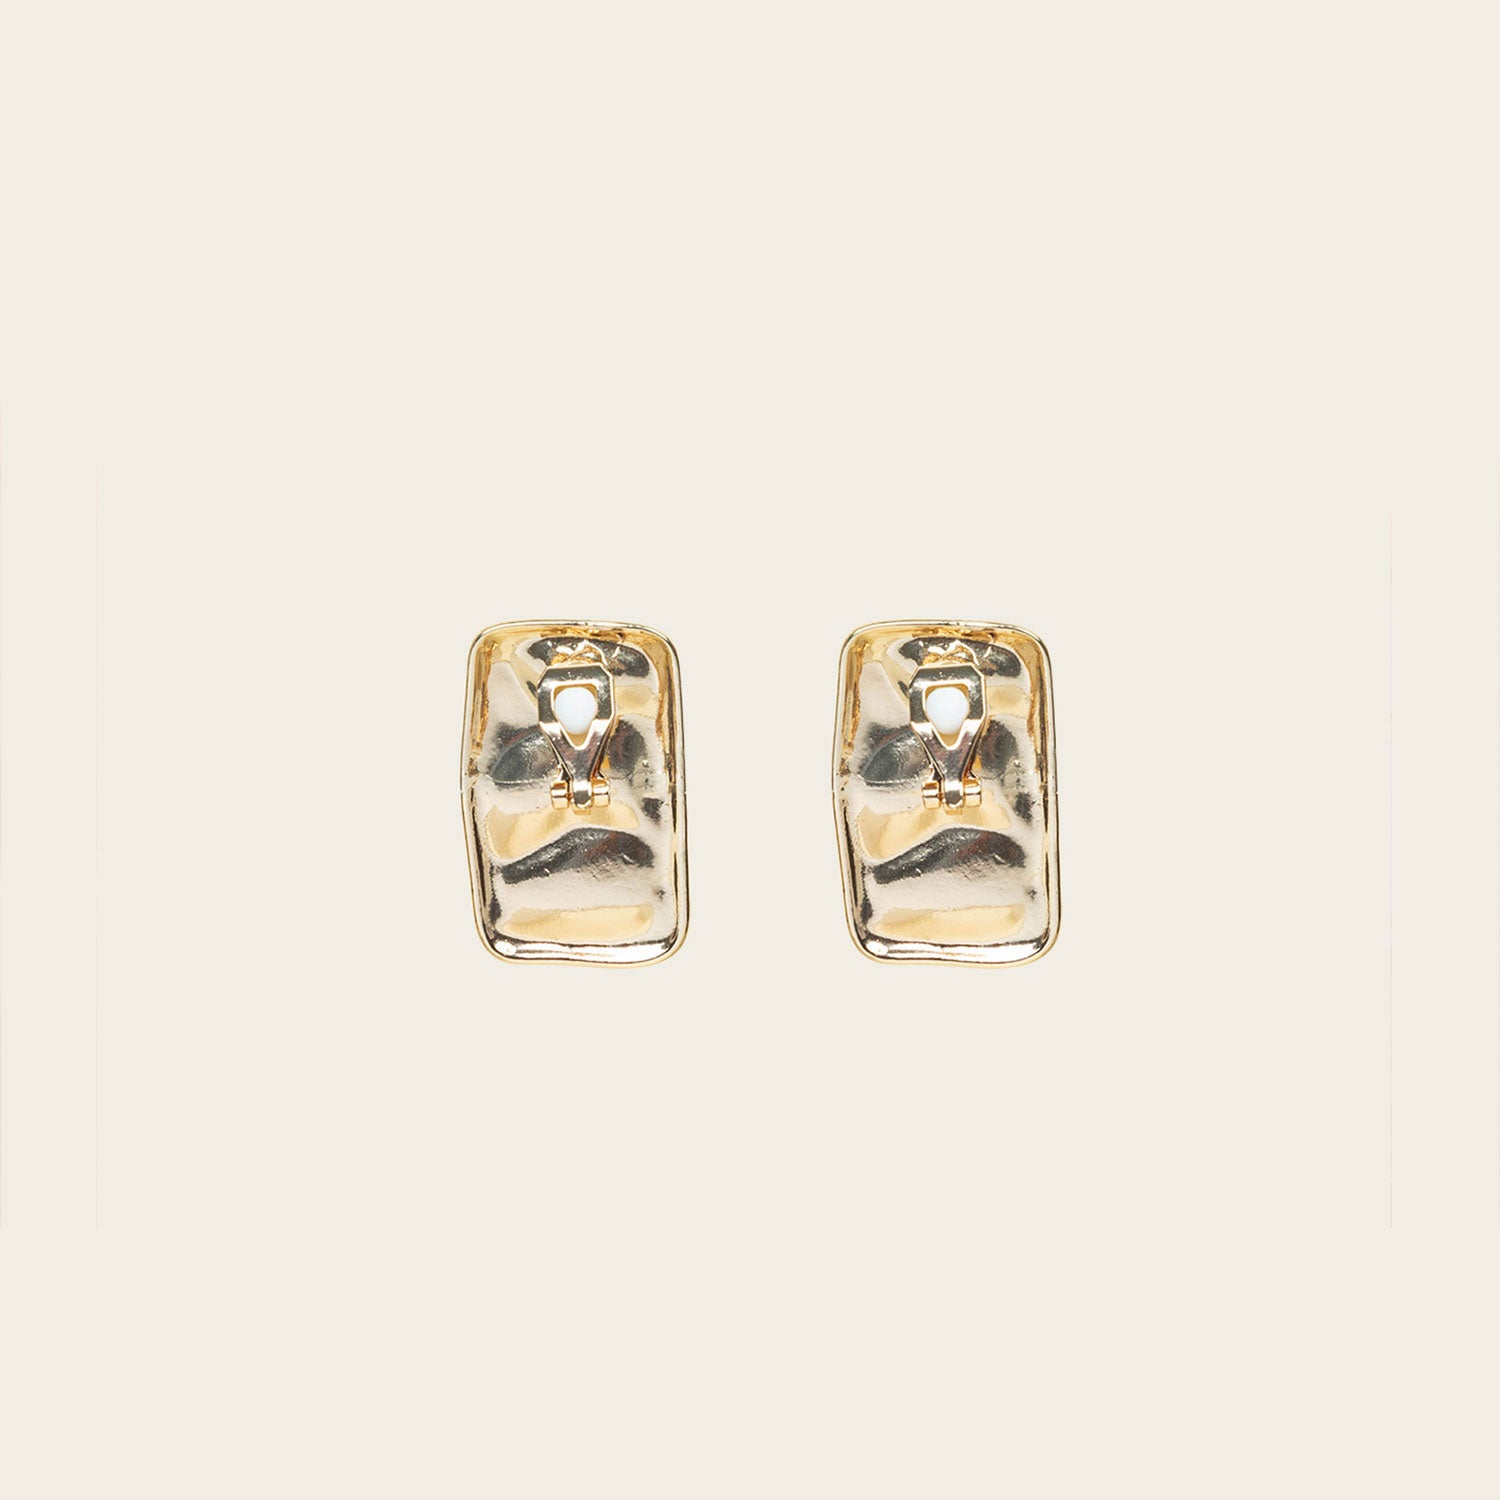 Image of the Nova Clip On Earrings in Gold feature a secure and comfortable padded clip-on design, suitable for all ear types. The earrings are crafted with Gold Tone Copper Alloy and offer an average comfortable wear duration of 8-12 hours. The design of the earring does not allow for adjustment, and each item sold is a single pair.